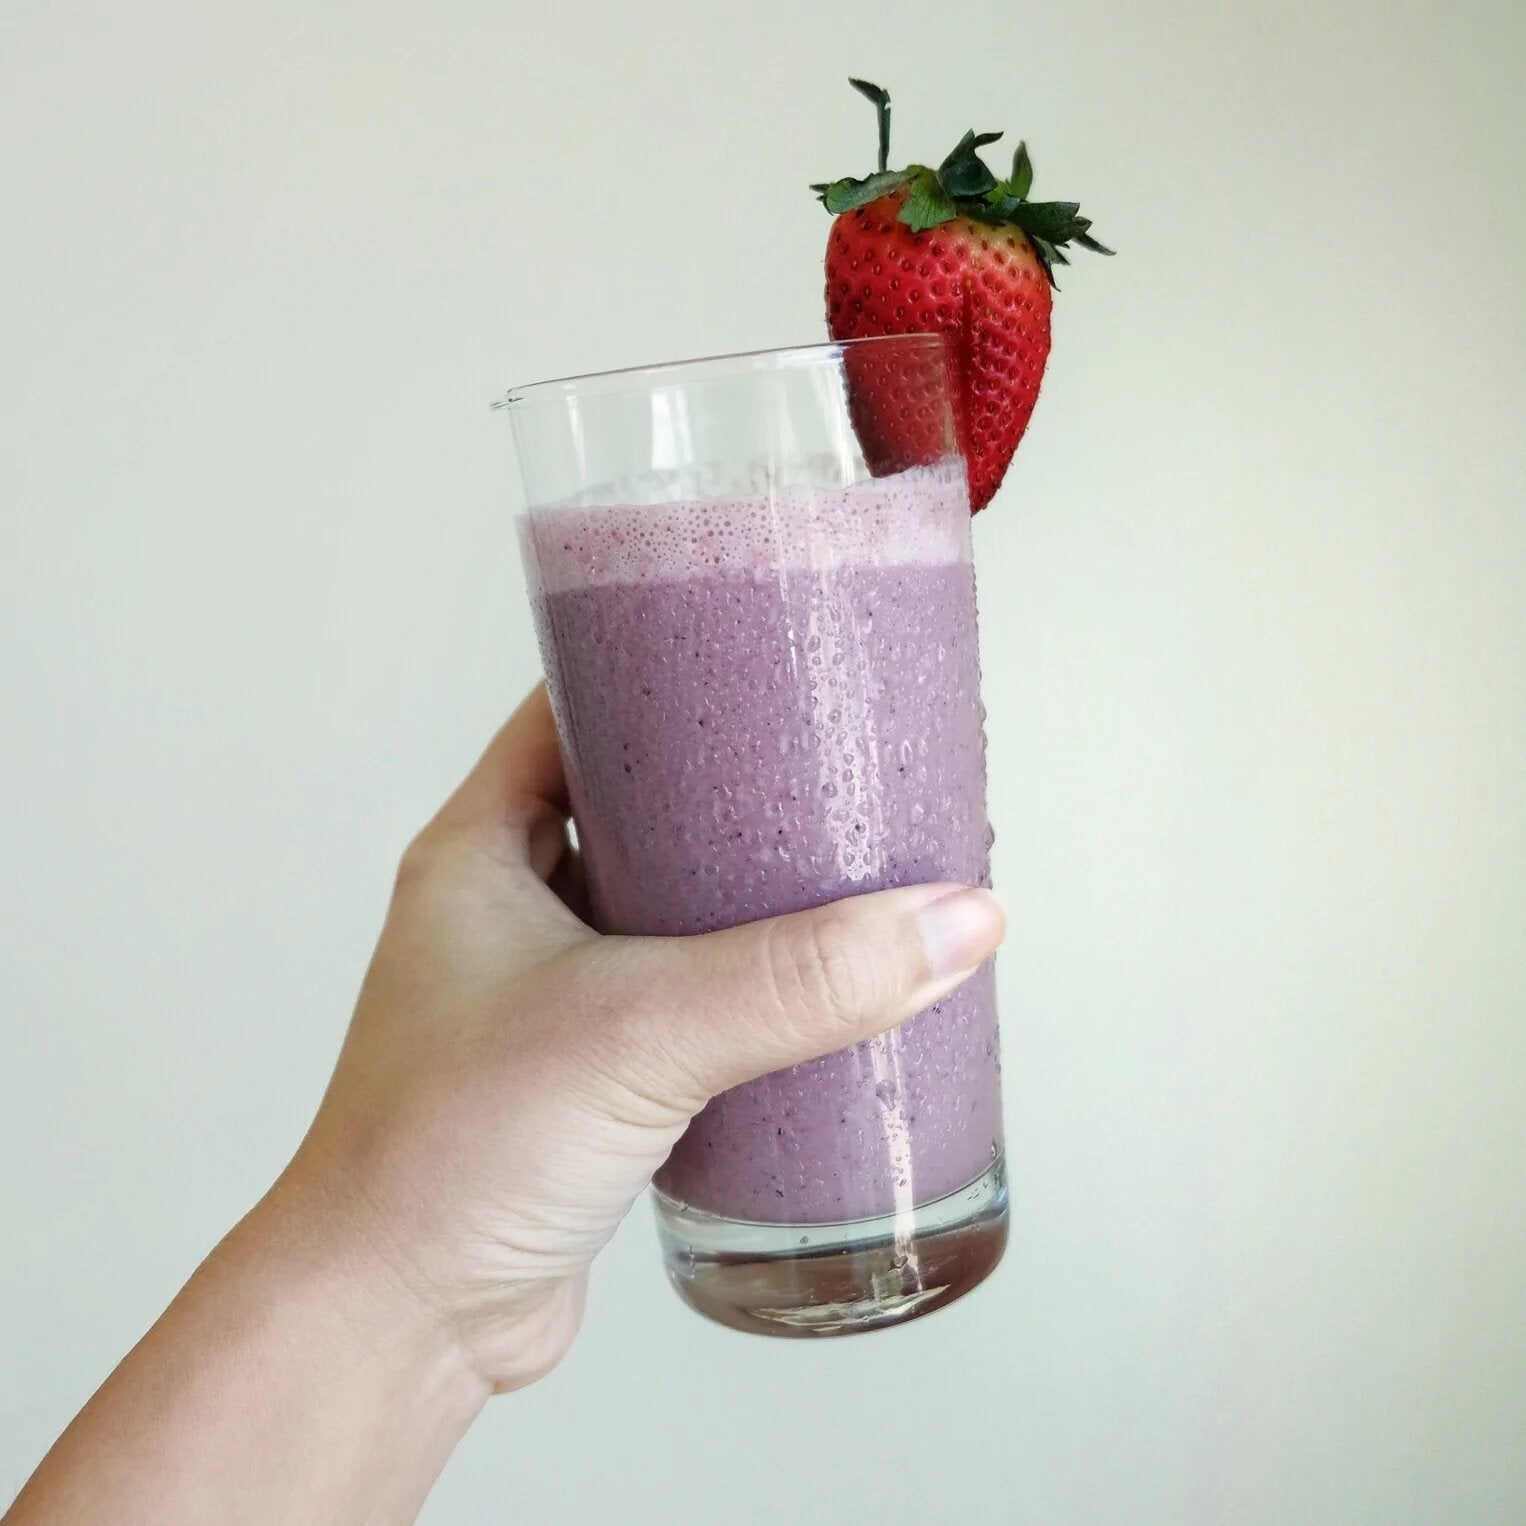 The Perfect Smoothie